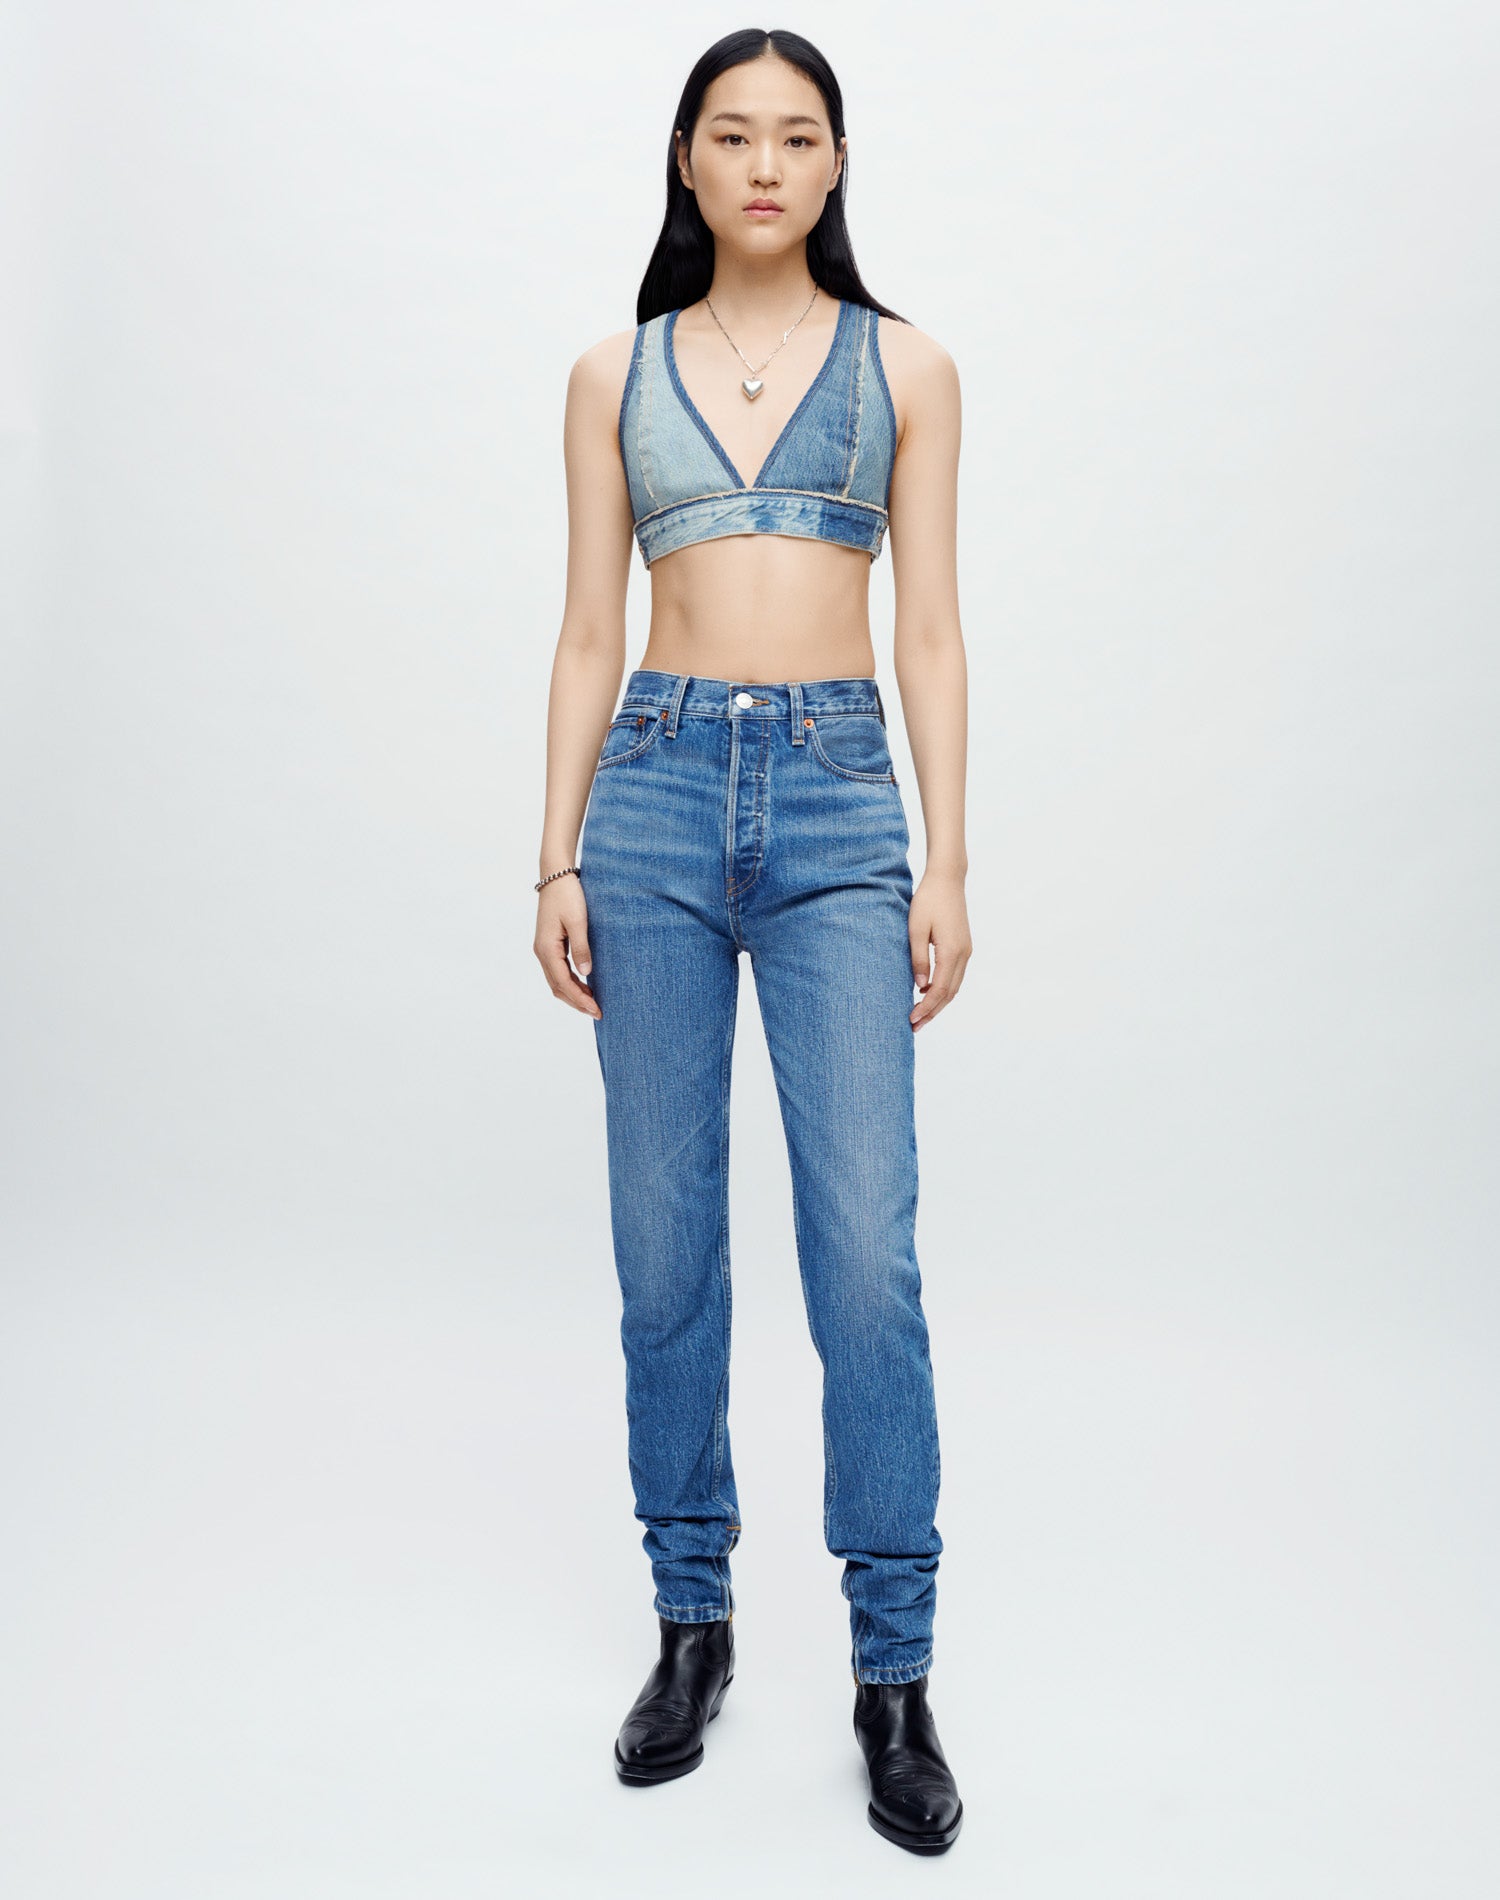 RE/DONE x Levi's  Bra Top in Tinted Indigo Fray